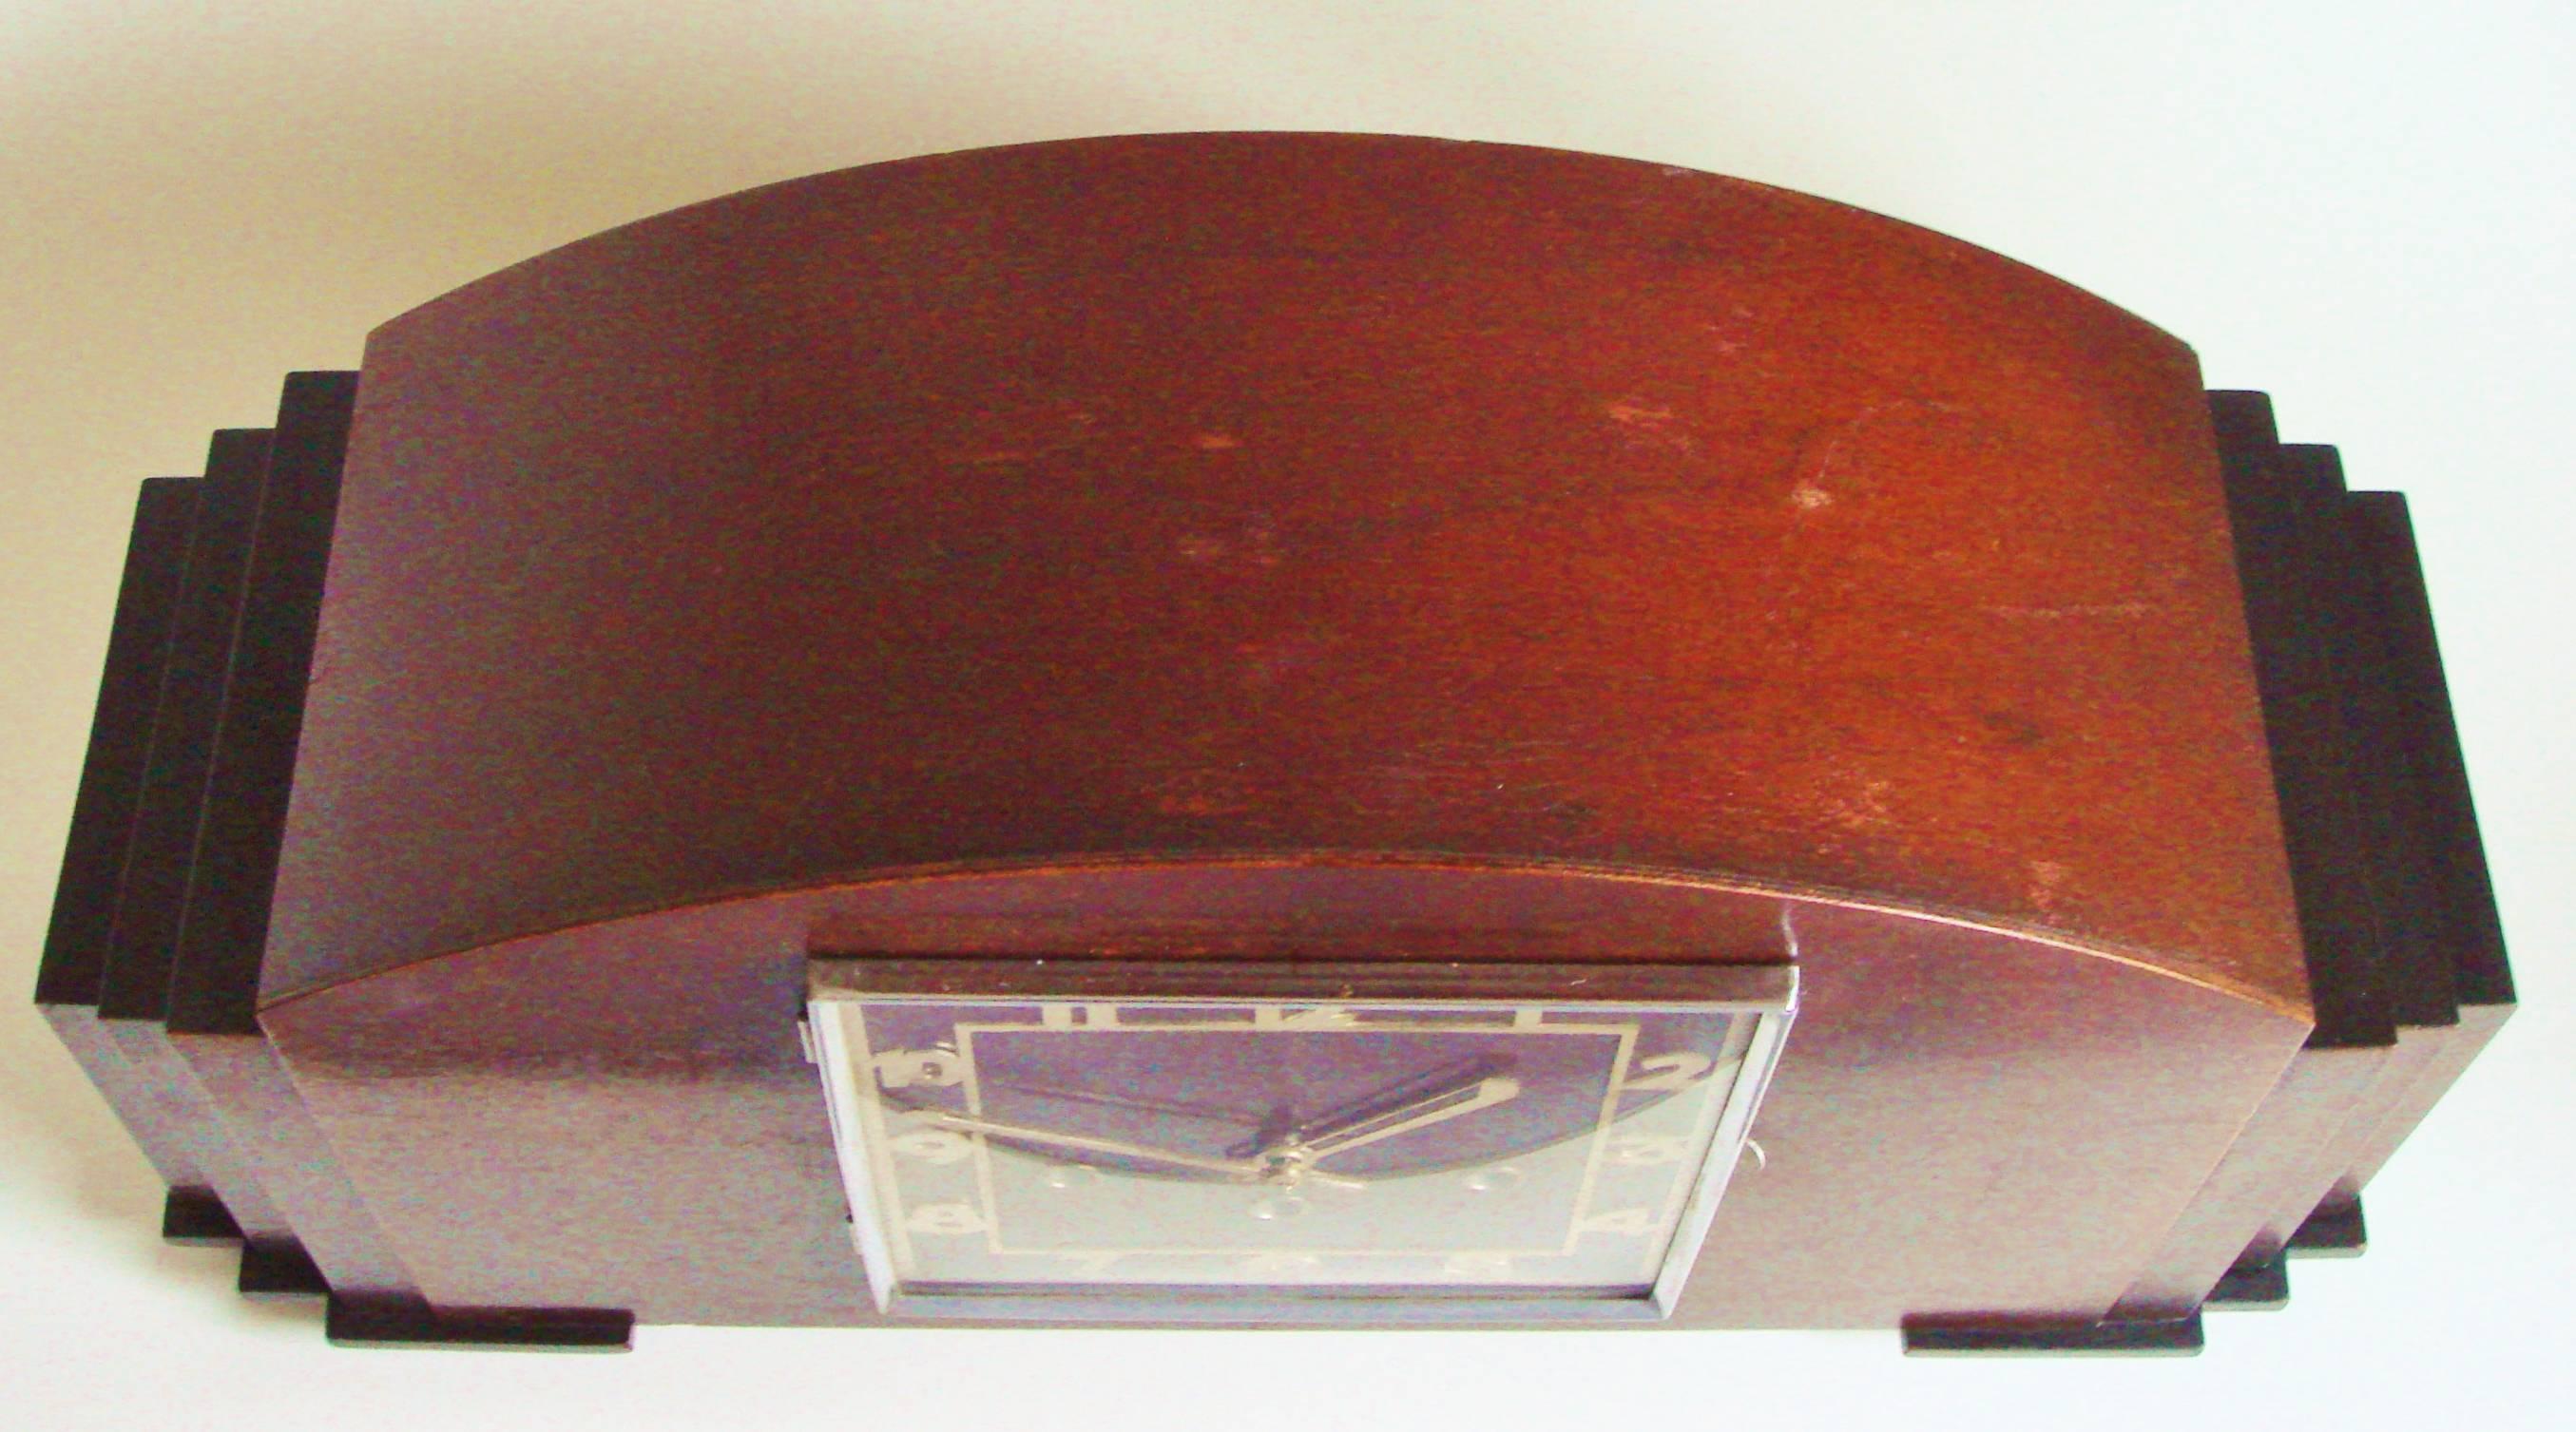 The design of this monumental architectural mantel clock has been attributed to the German clock making company Mauthe of Schwenningen and is a triumph of Art Deco design. The front of the arch-topped body of the clock is veneered in figured